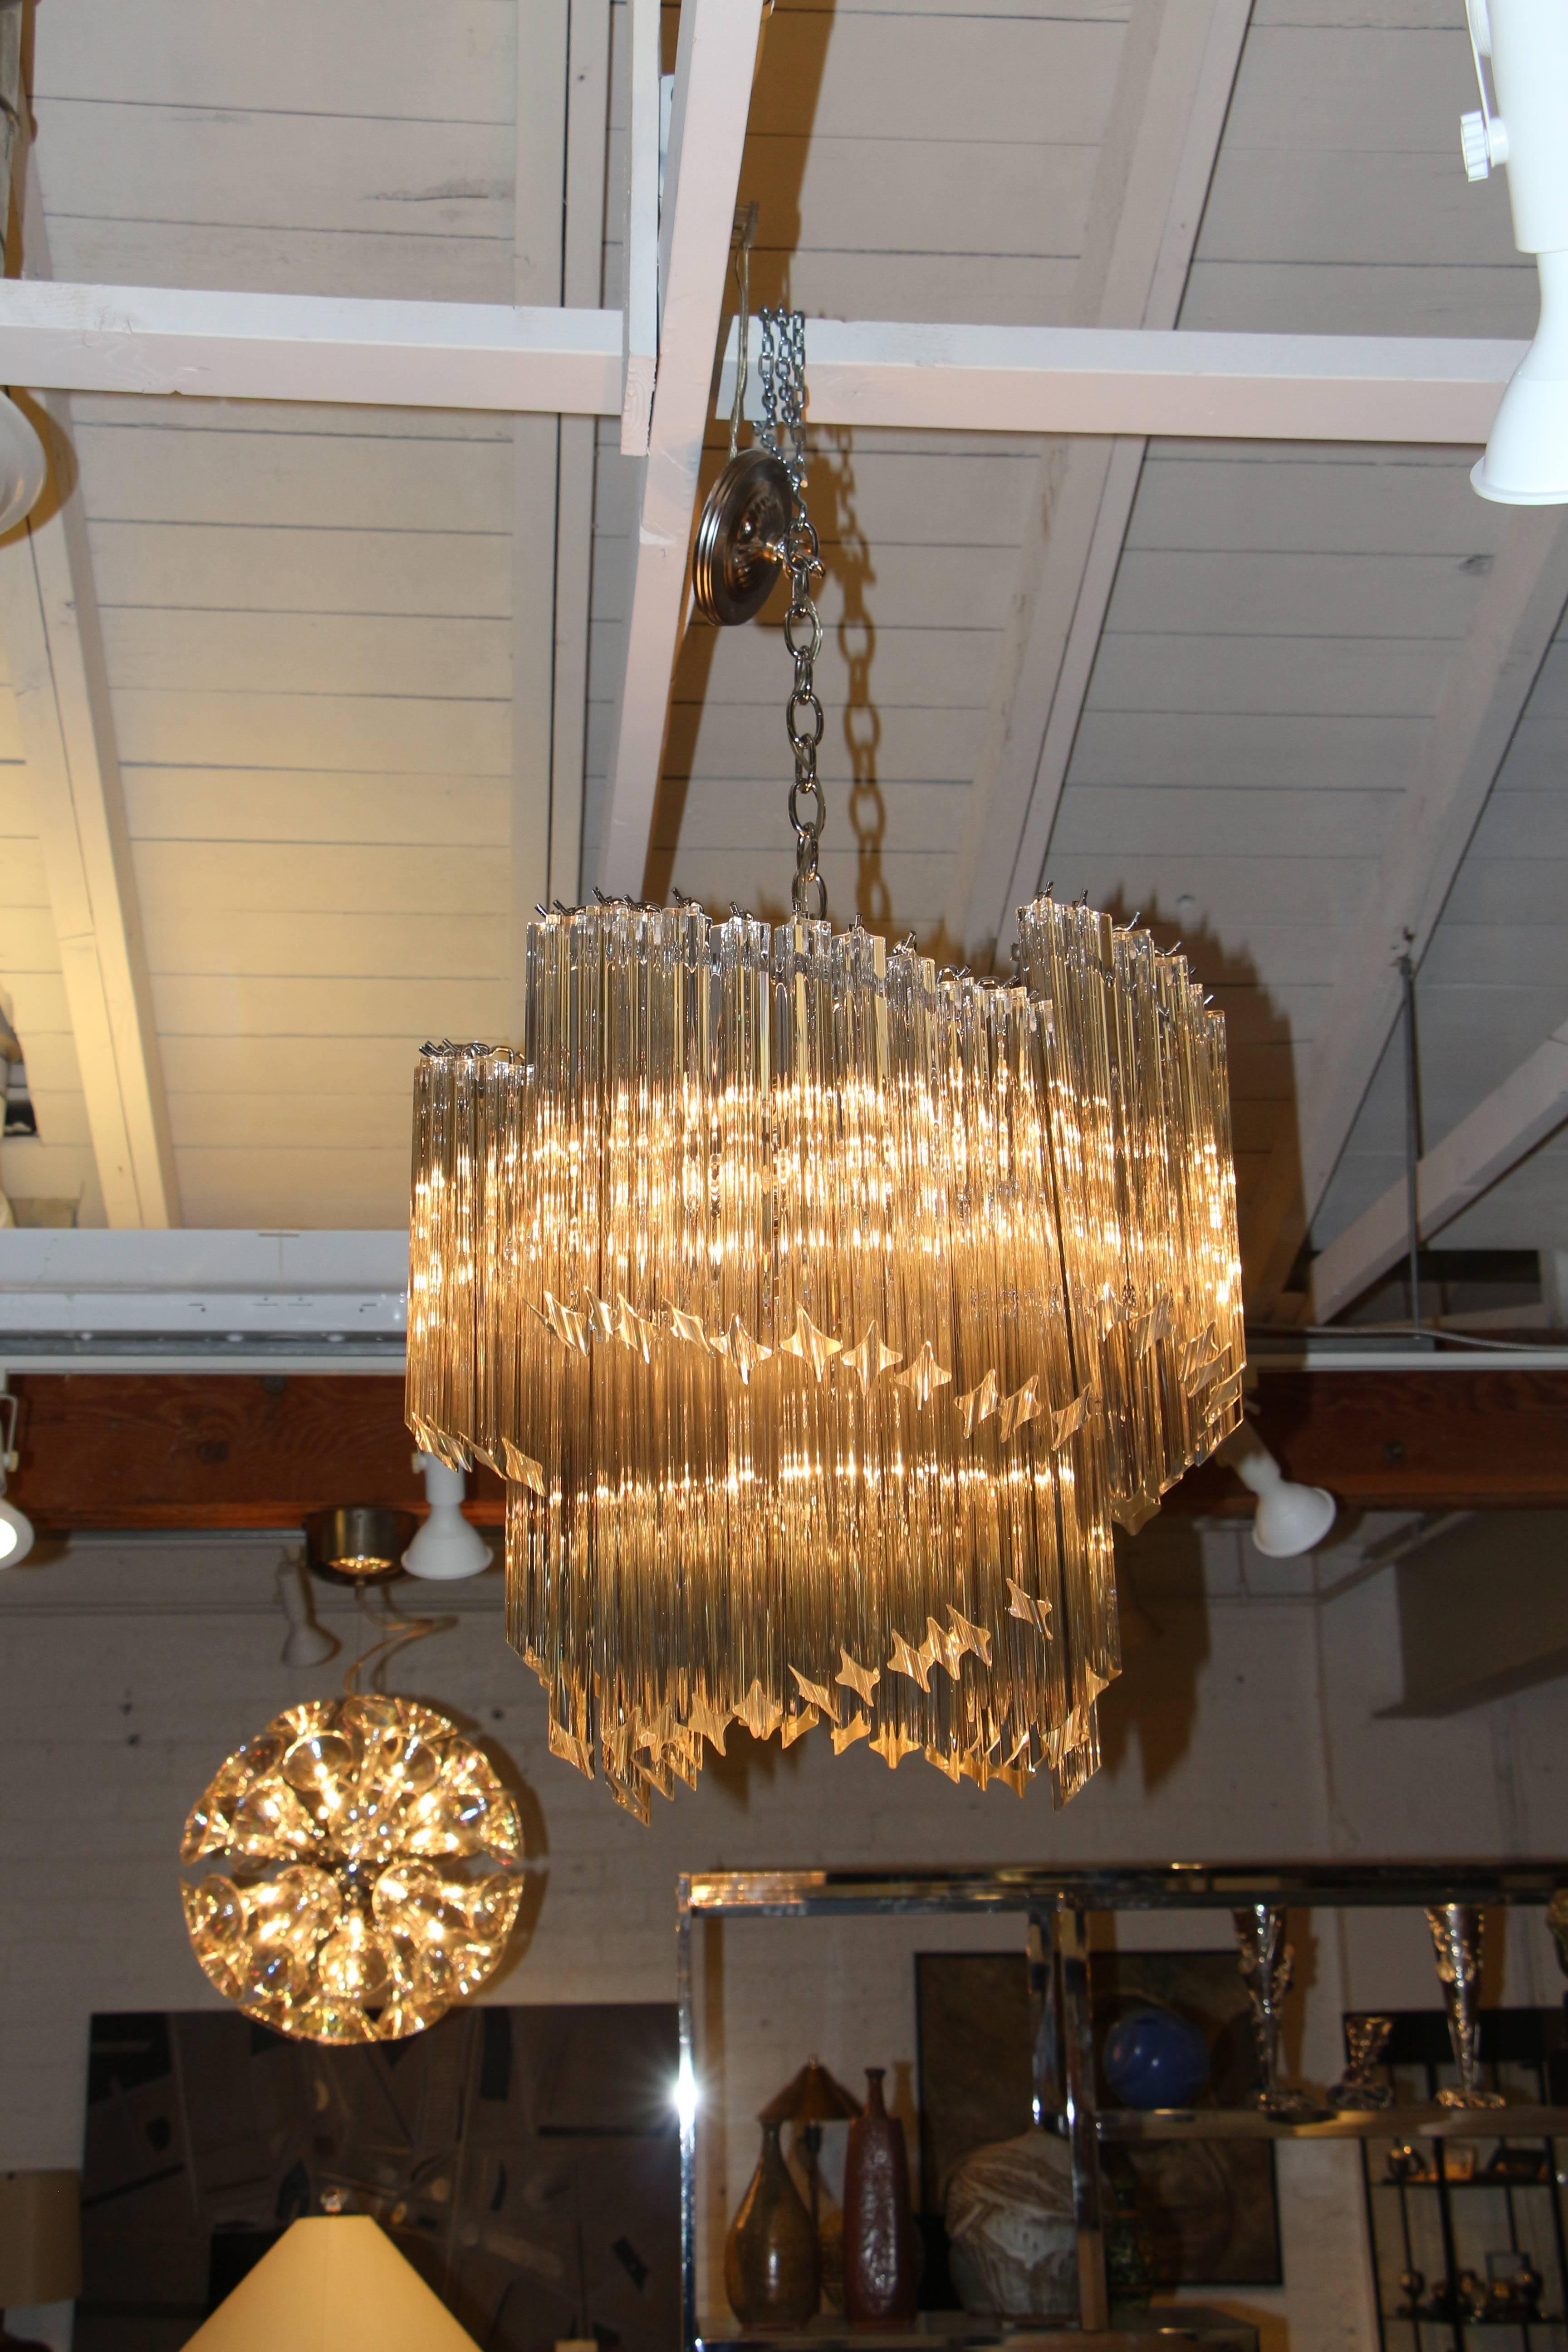 A beautiful Camer fixtures with Venini glass pendants. The crystals are approximate 11.5 inches long. The dimensions given are for the fixture itself, not including the chain. There are a number of chips to the crystals. Hard to see the flaws when